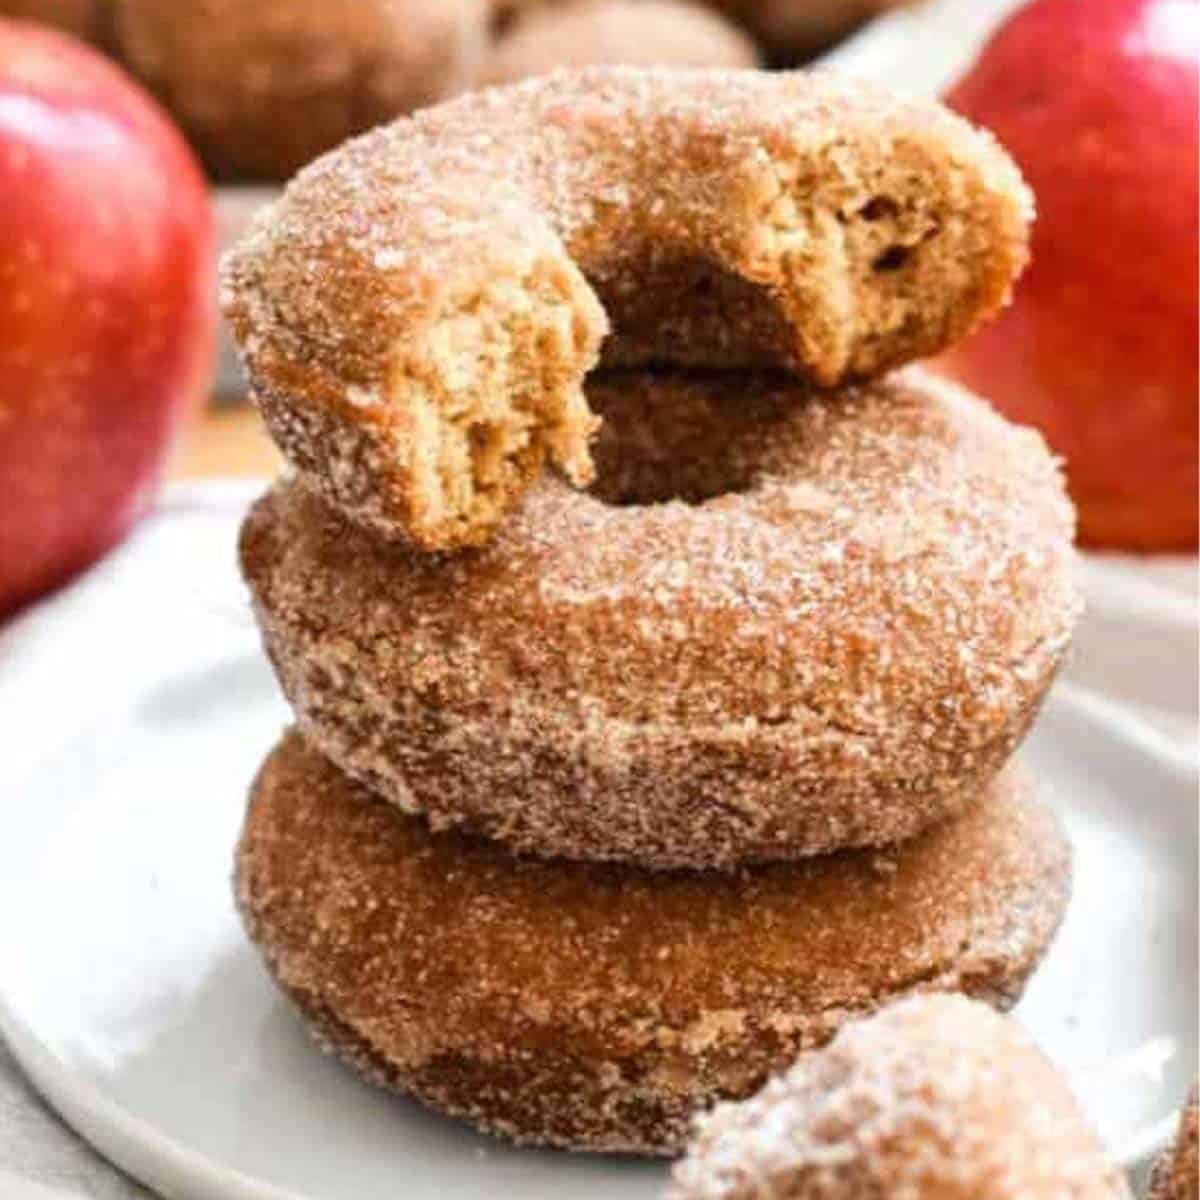 A stack of apple cider donuts on a white plate with red apples